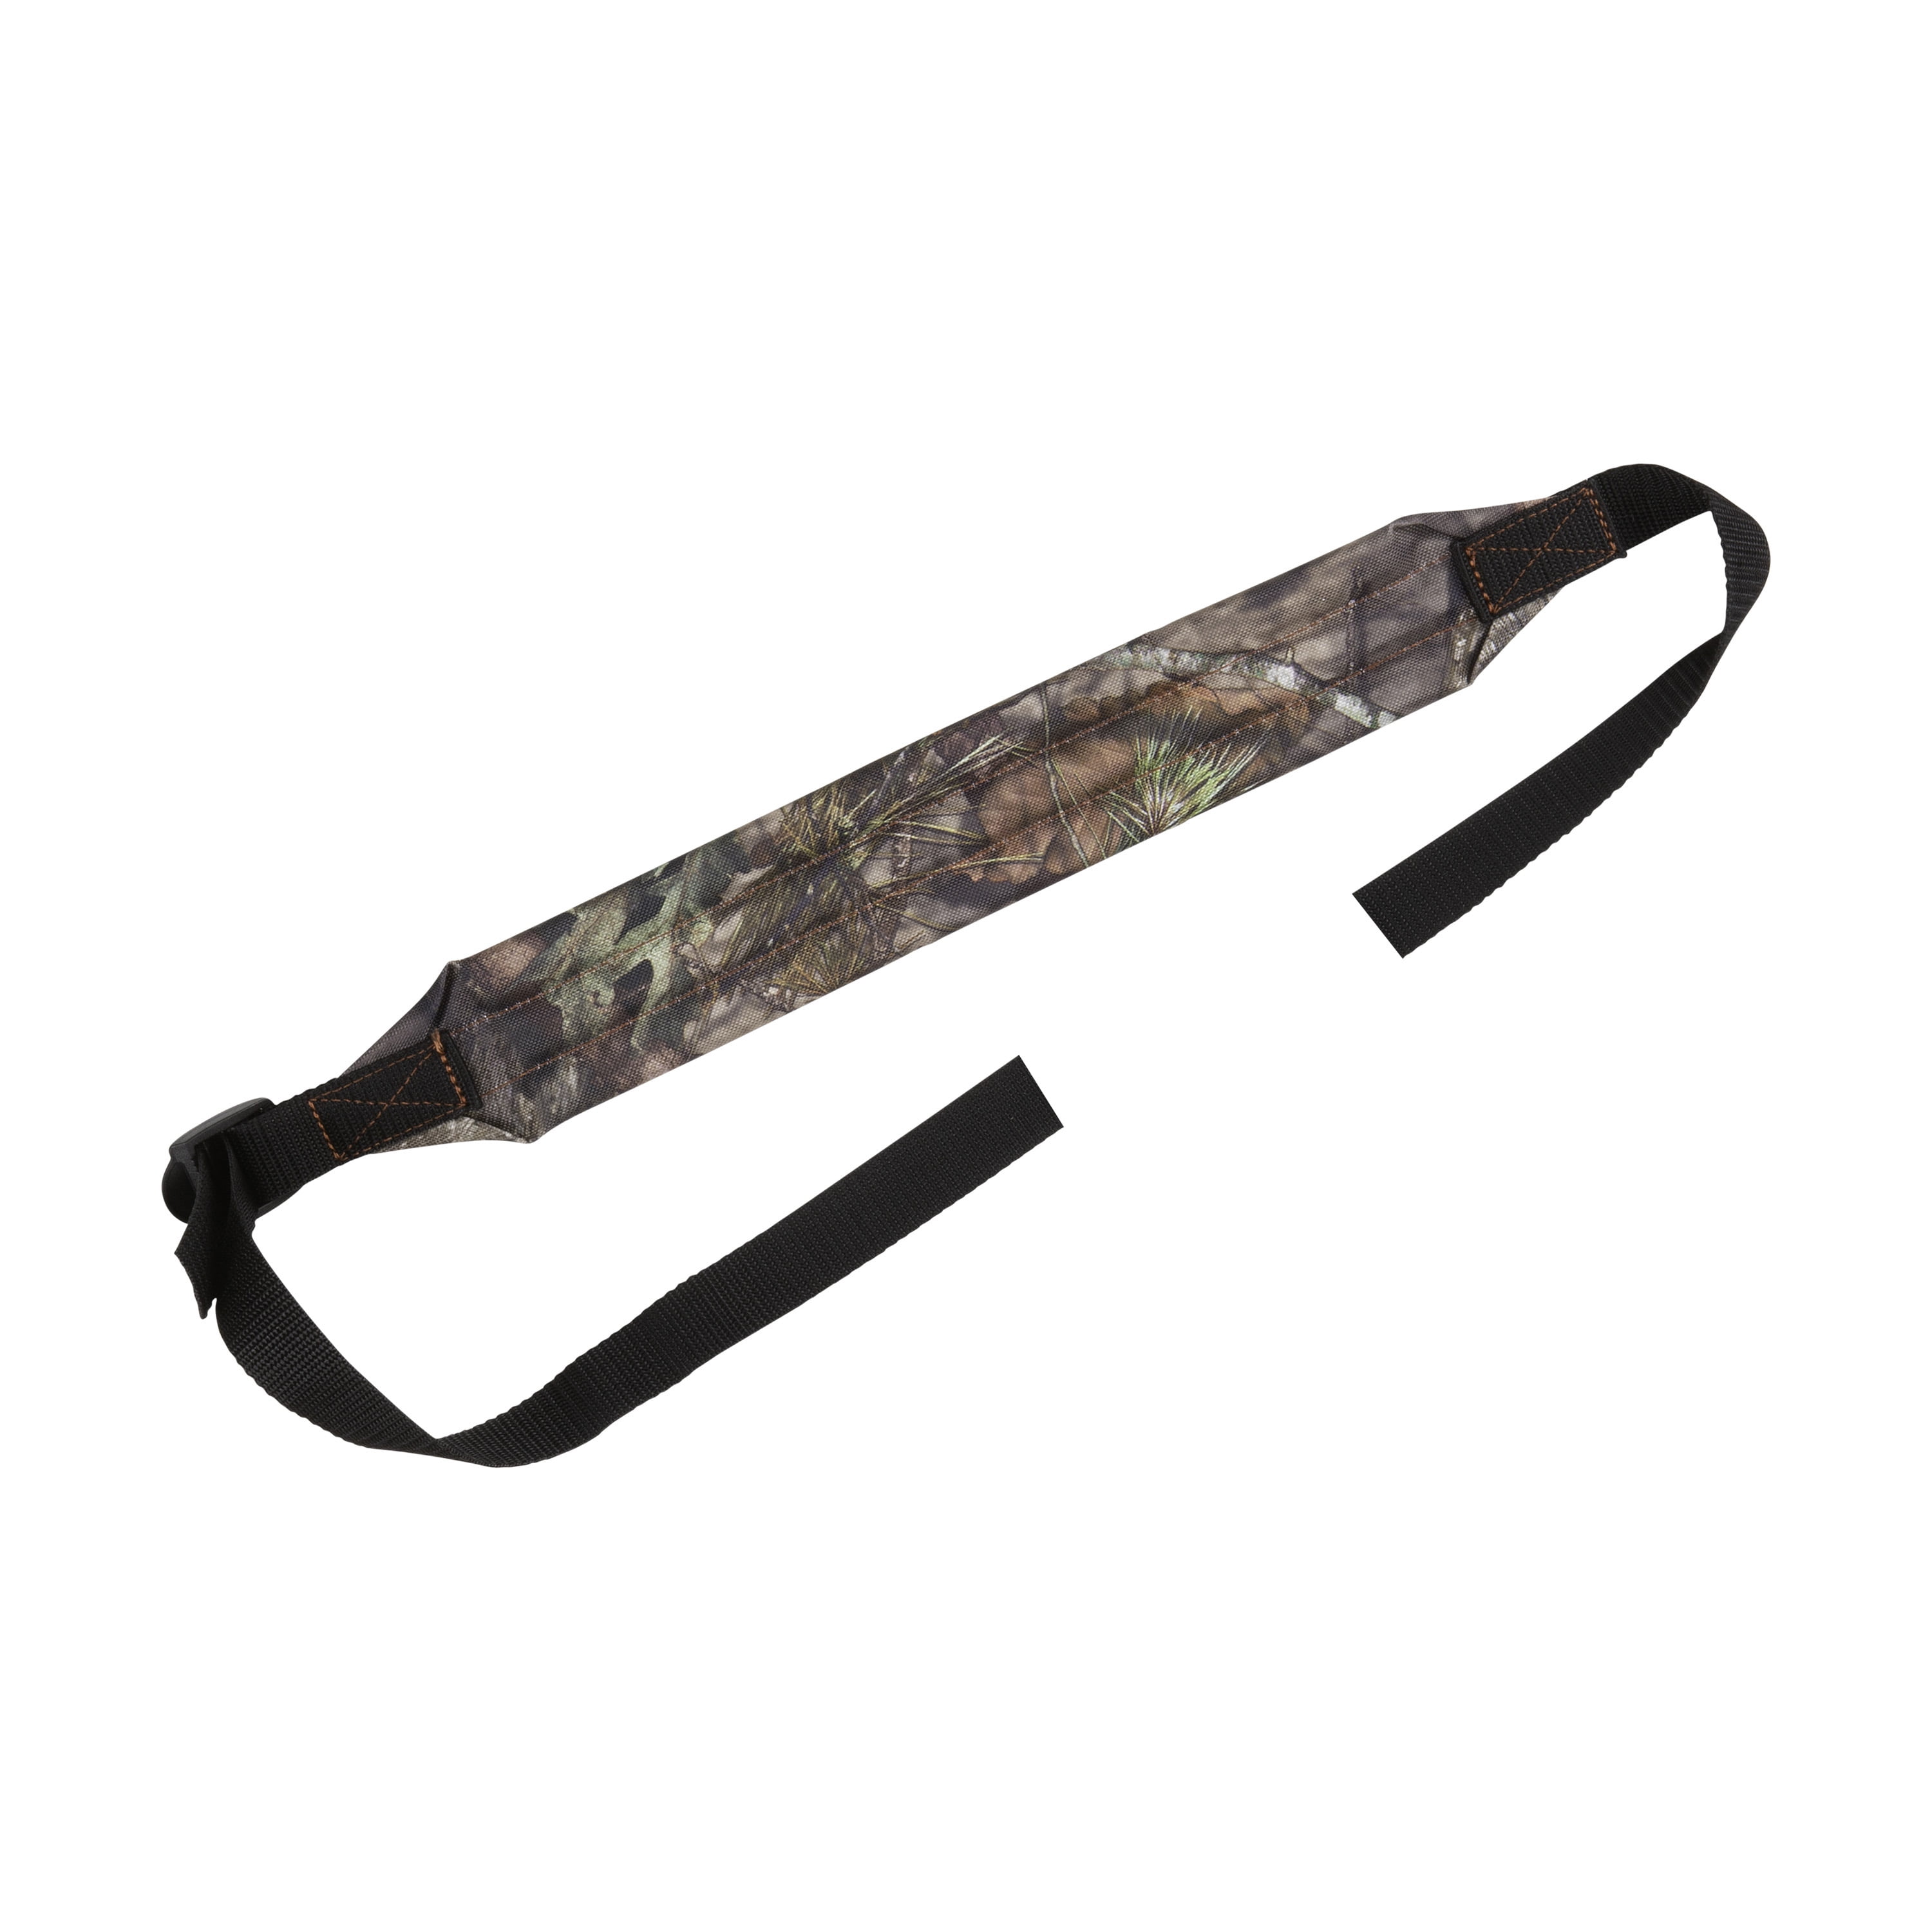 Details about   Allen Odessa Neoprene Sling with Swivels Realtree AP Camo with Pink Accents 8218 